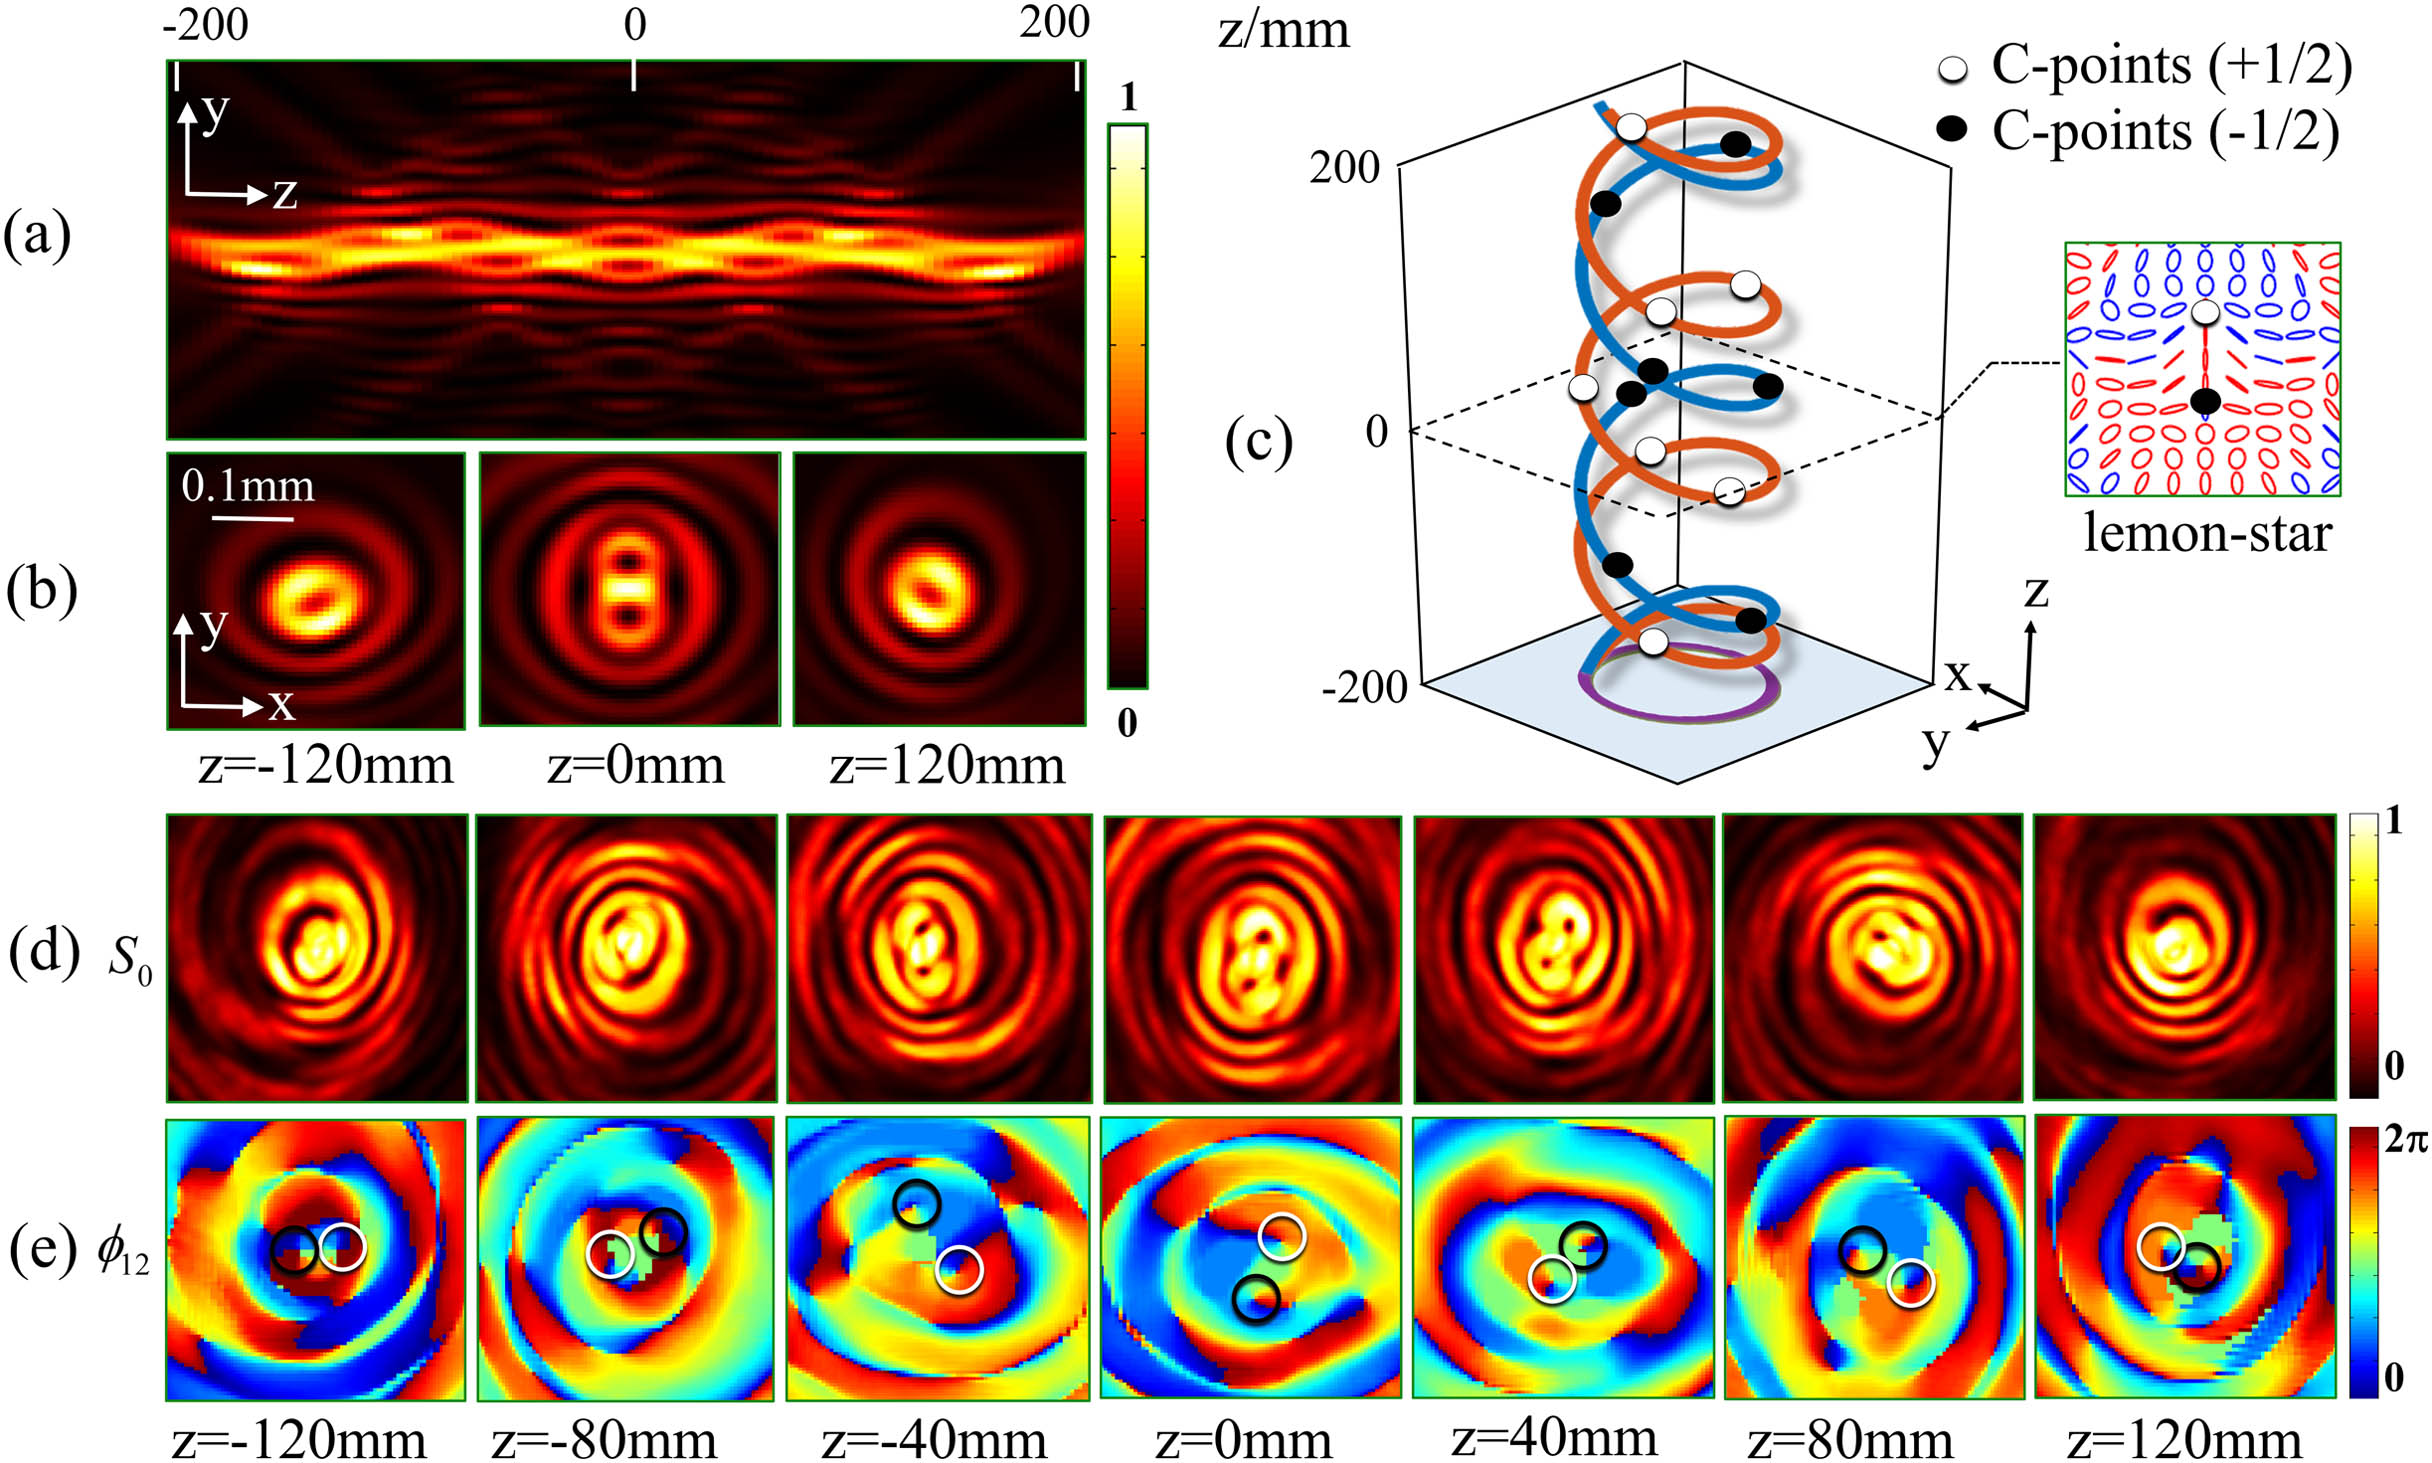 Numerical and experimental demonstrations of the manipulated propagation trajectories of PSs in form of braiding. (a) Simulated side-view propagation of the composite Bessel-like beam and (b) transverse beam patterns at three different positions. (c) The spiral propagation trajectories of the C-points (i.e., C-lines, depicted by continuous lines) are accompanied by a top-view image at the bottom, and the polarization distribution in the Fourier plane is indicated as an inset to suggest the initial field with lemon–star topological configuration, where the red and blue colors denote RH and LH polarization states. (d) and (e) Measured transverse beam patterns and Stokes phases ϕ12 at different positions, where the white and black circles represent the Stokes vortices, corresponding to positive and negative C-points marked by dots on the C-lines in (c), respectively.